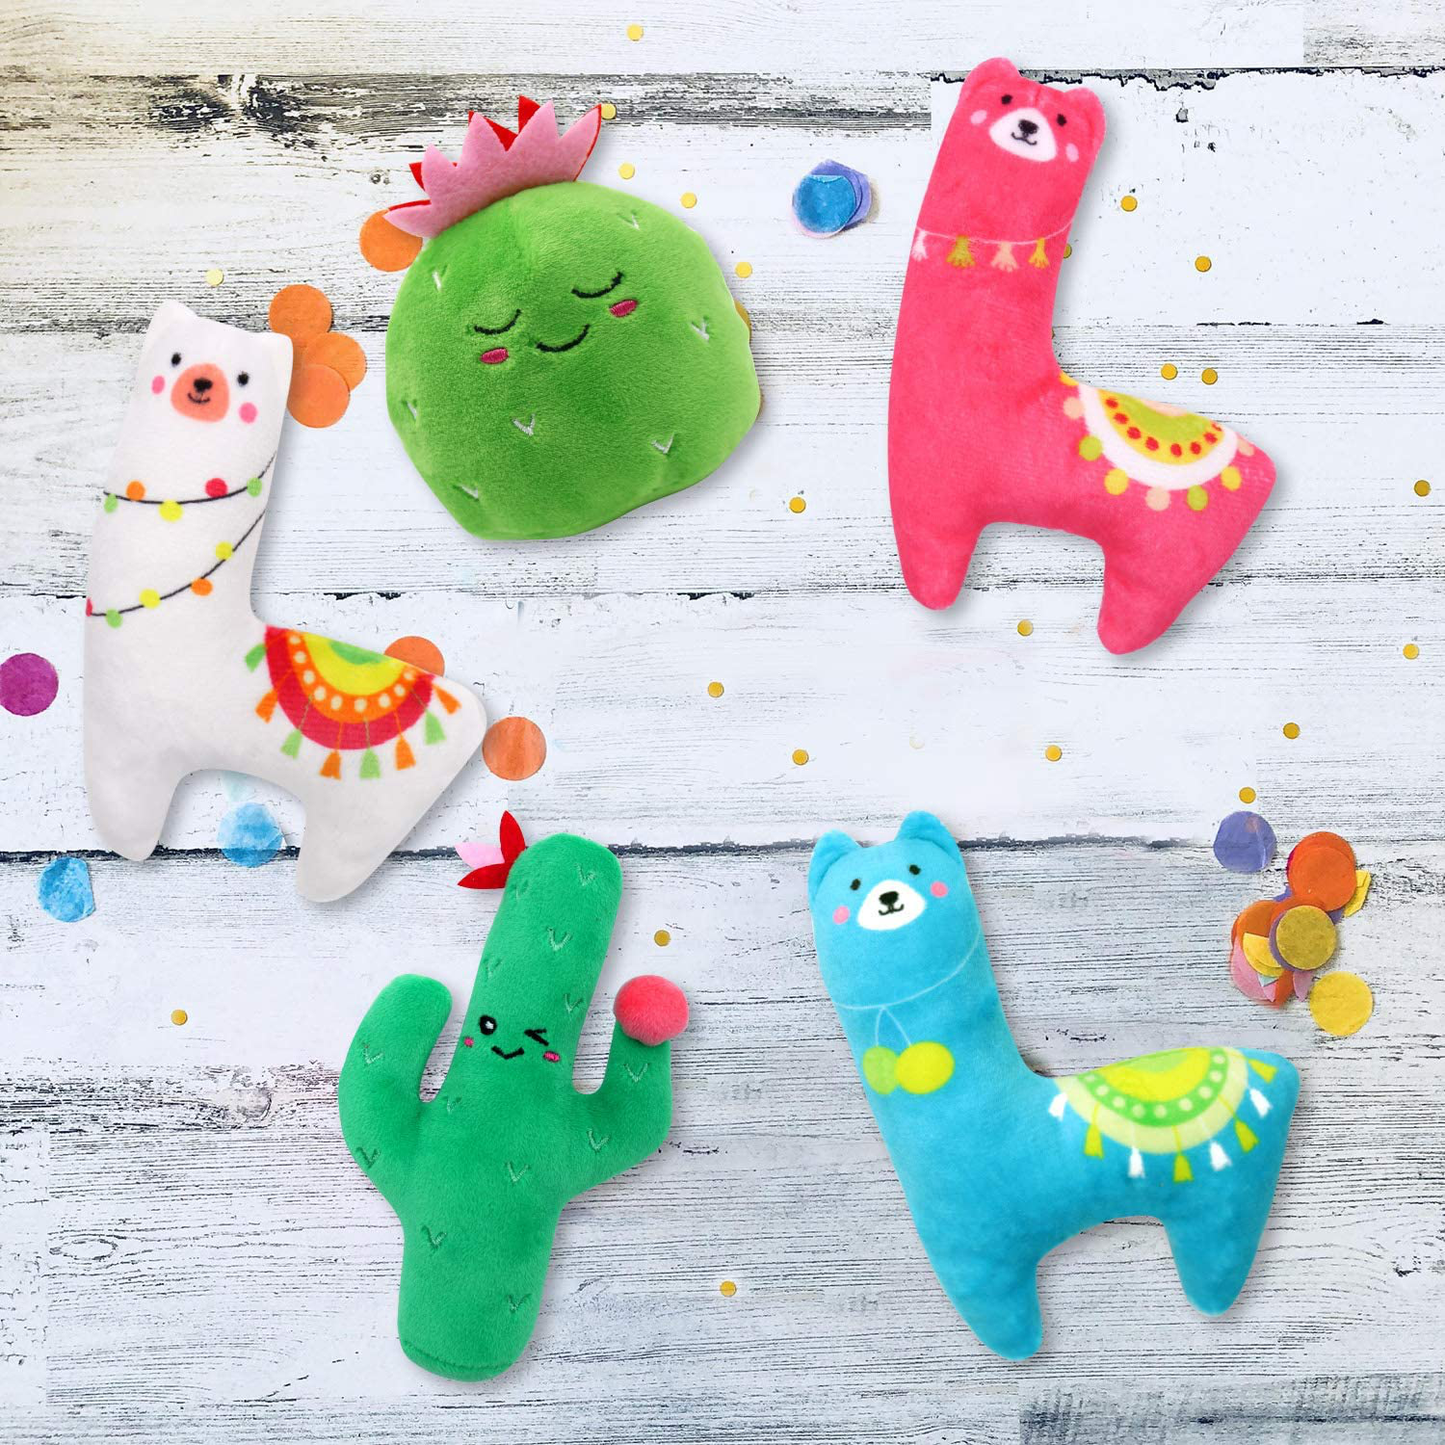 Ciyvolyeen 5Pcs Llama Catnip Cat Toys Cactus Cat Chew Interactive Toy for Cat Lover Gift Indoor Cat Kitty Bite Toys Supplies Llama Gifts Animals & Pet Supplies > Pet Supplies > Cat Supplies > Cat Toys CiyvoLyeen   